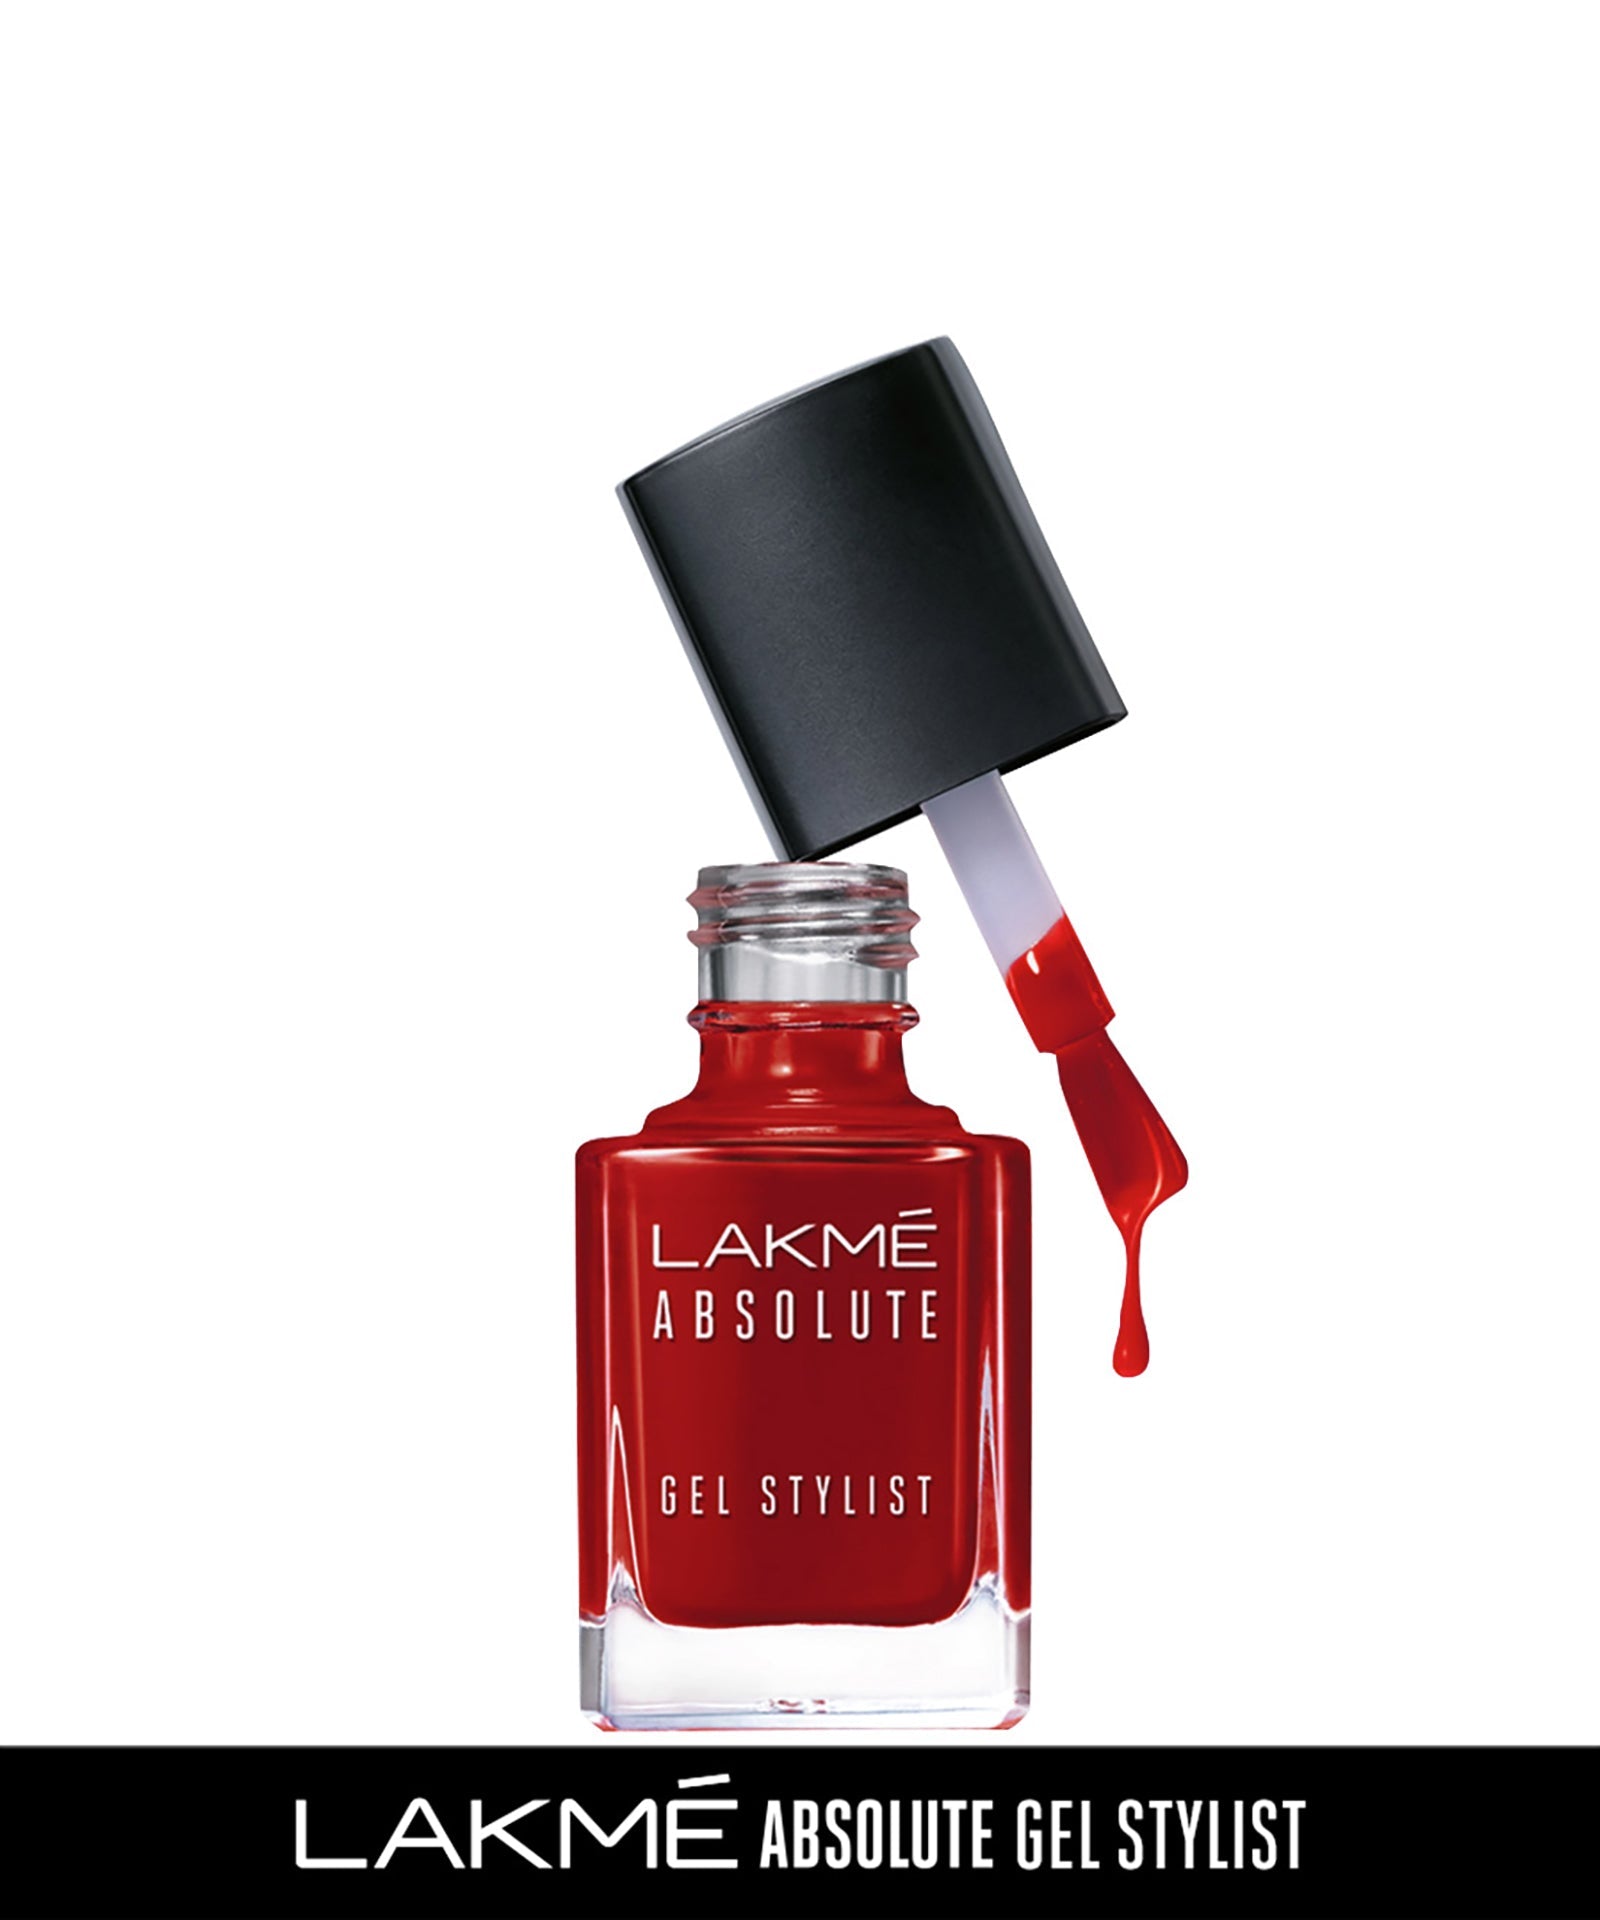 Buy Lakmé Color Crush Nail Art P1, Multicolor, 6 ml Online at Low Prices in  India - Amazon.in